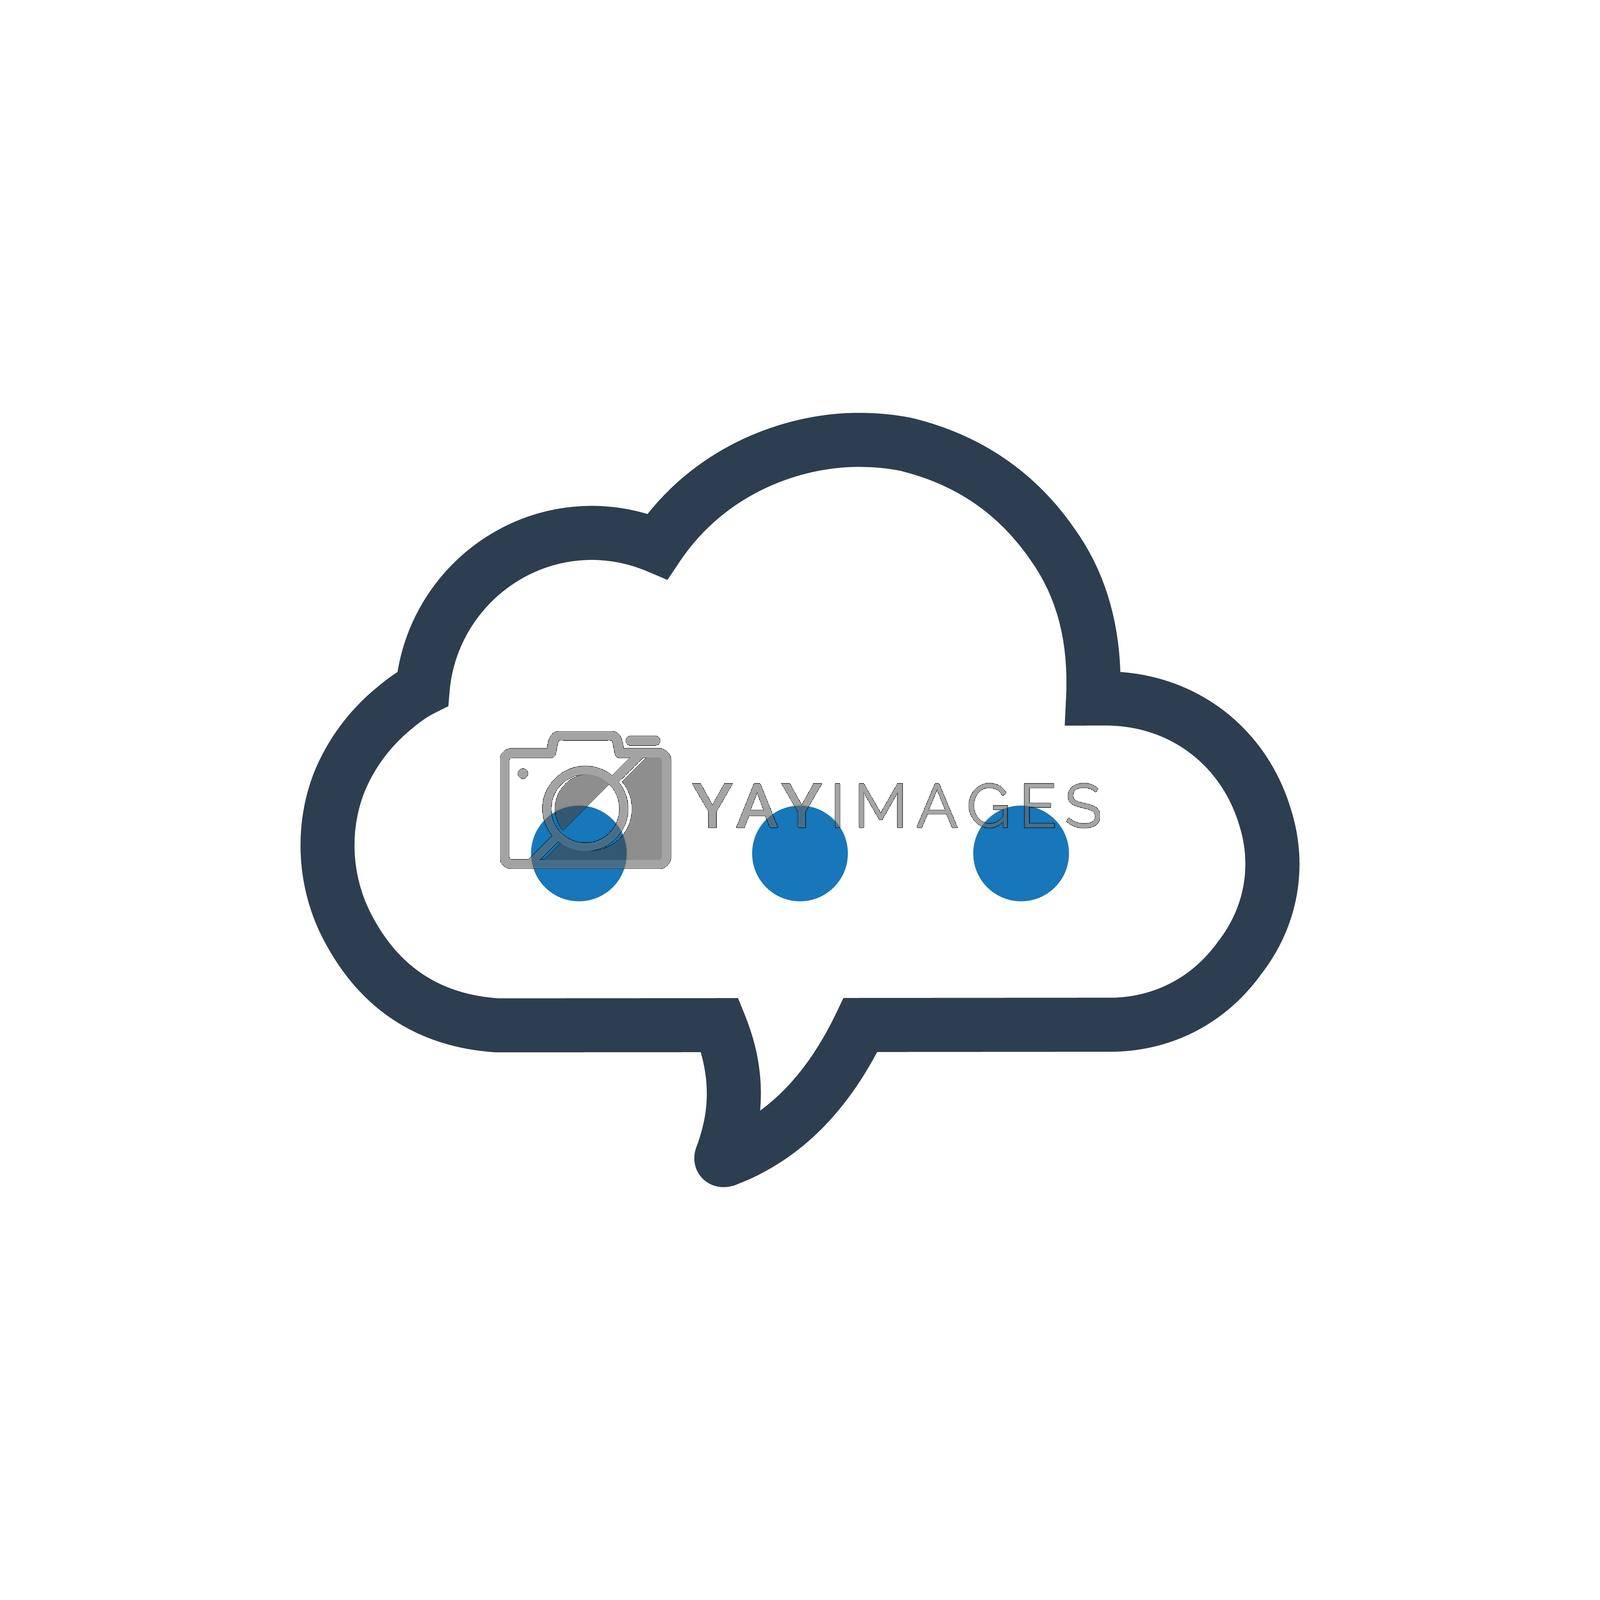 Cloud Talking / Communication icon. Meticulously designed vector EPS file.